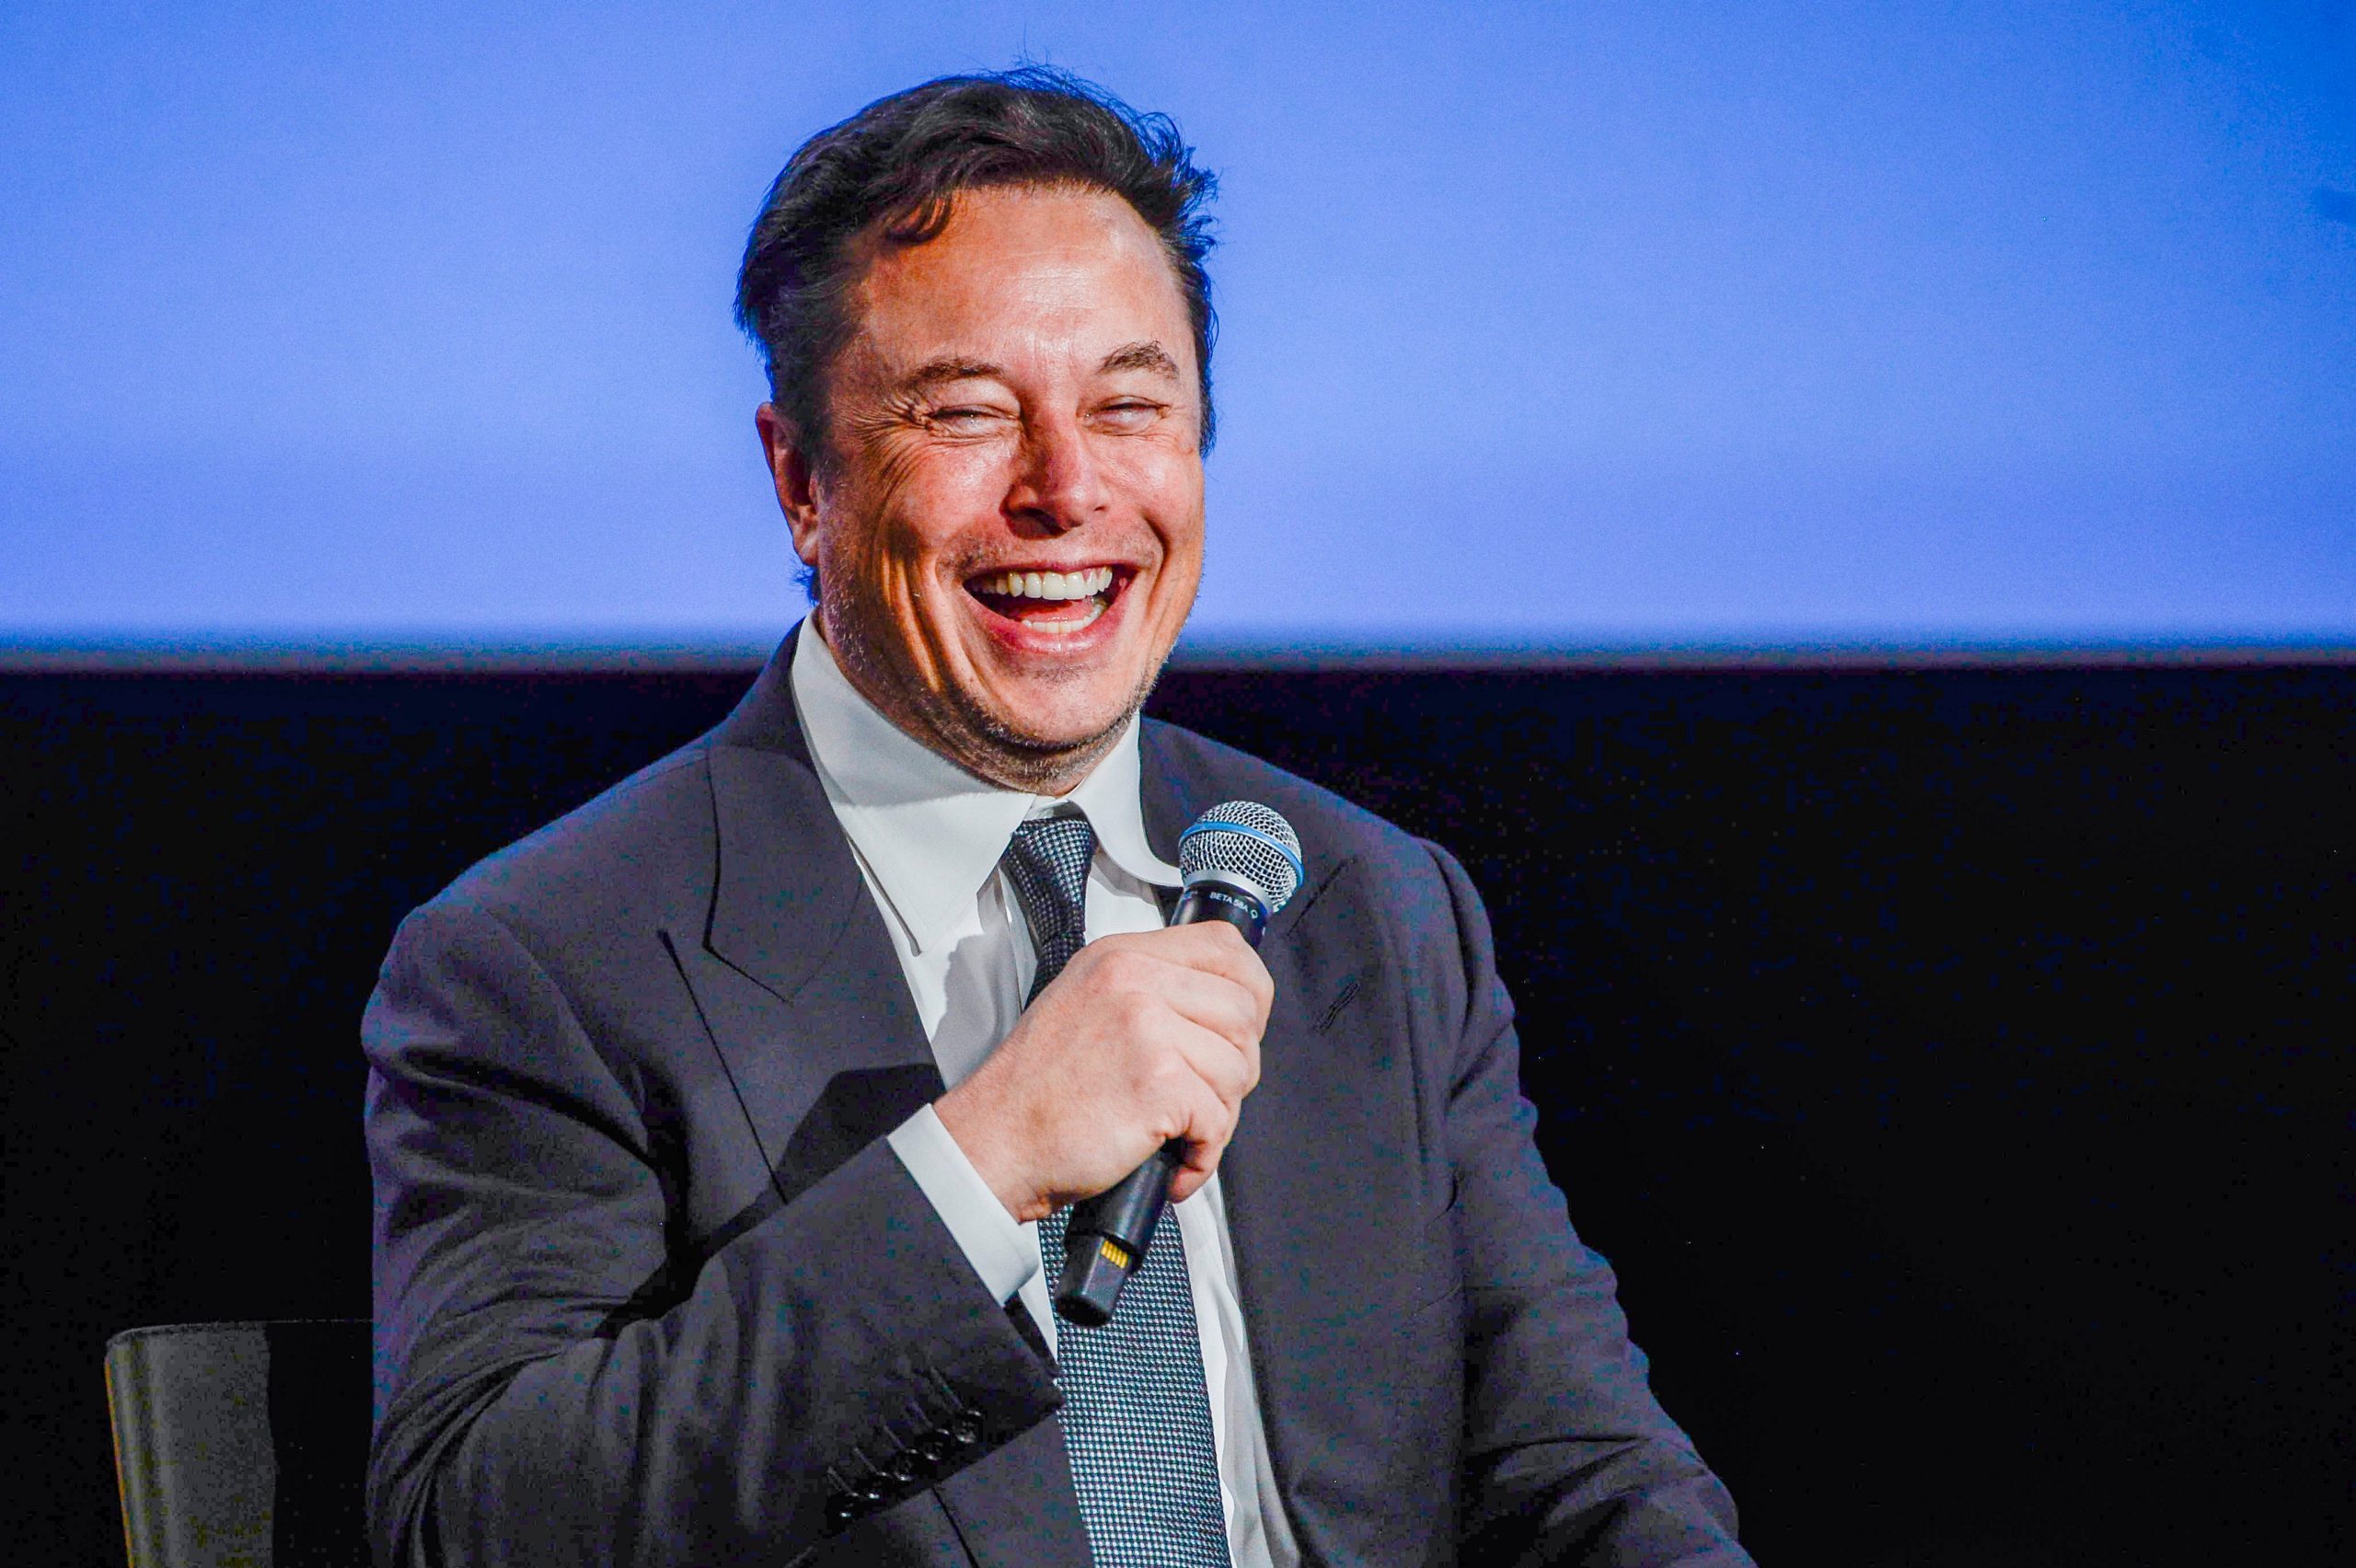 Elon Musk says he will start restoring nearly all banned Twitter accounts